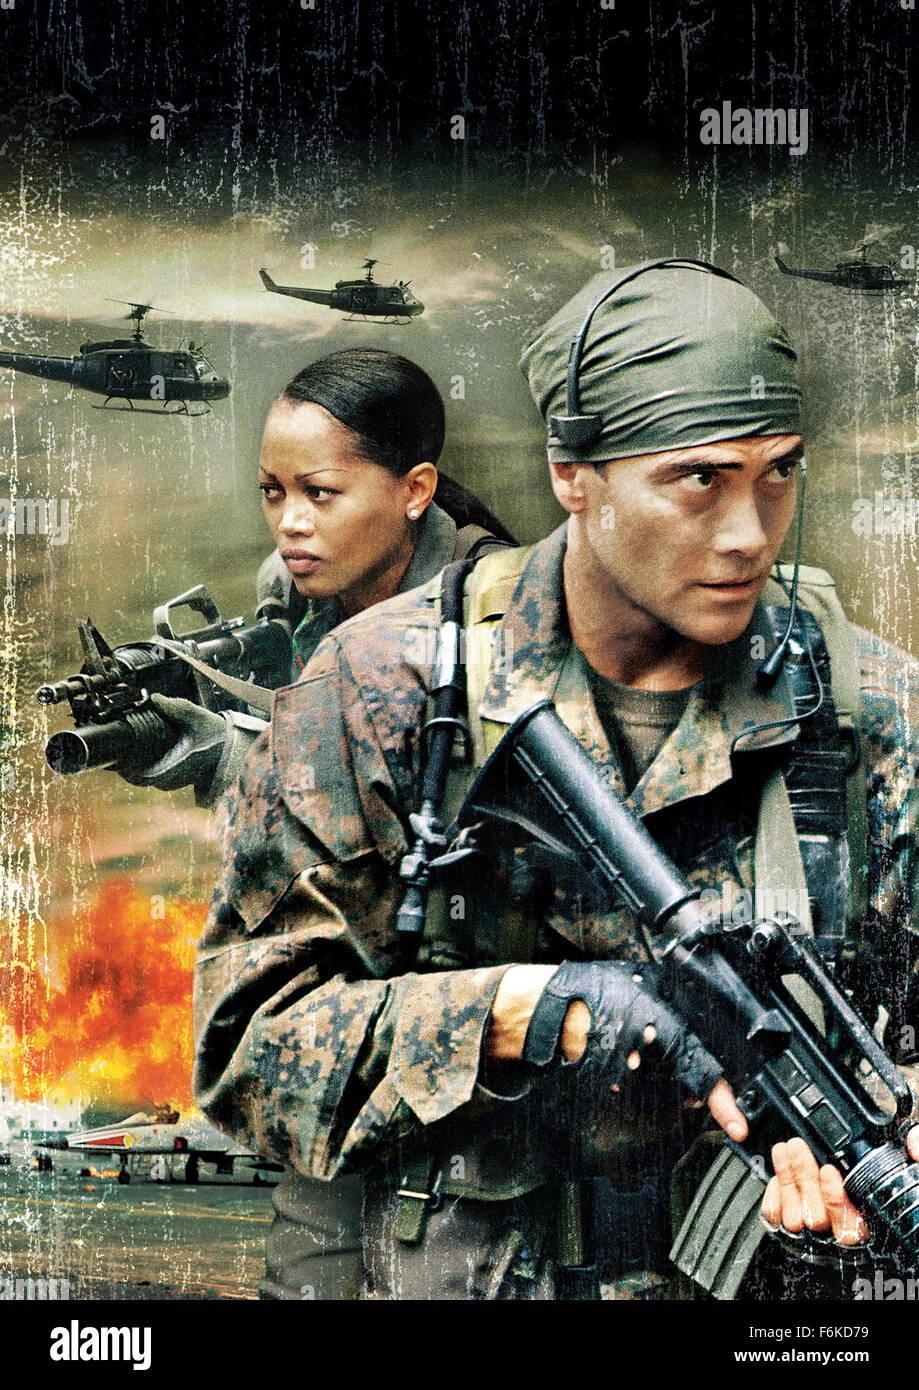 RELEASE DATE: June 27, 2006. MOVIE TITLE: The Hunt for Eagle One. STUDIO:  Sony Pictures. PLOT: The Strike Force team is back in this action-packed  sequel to 'The Hunt For Eagle One'!